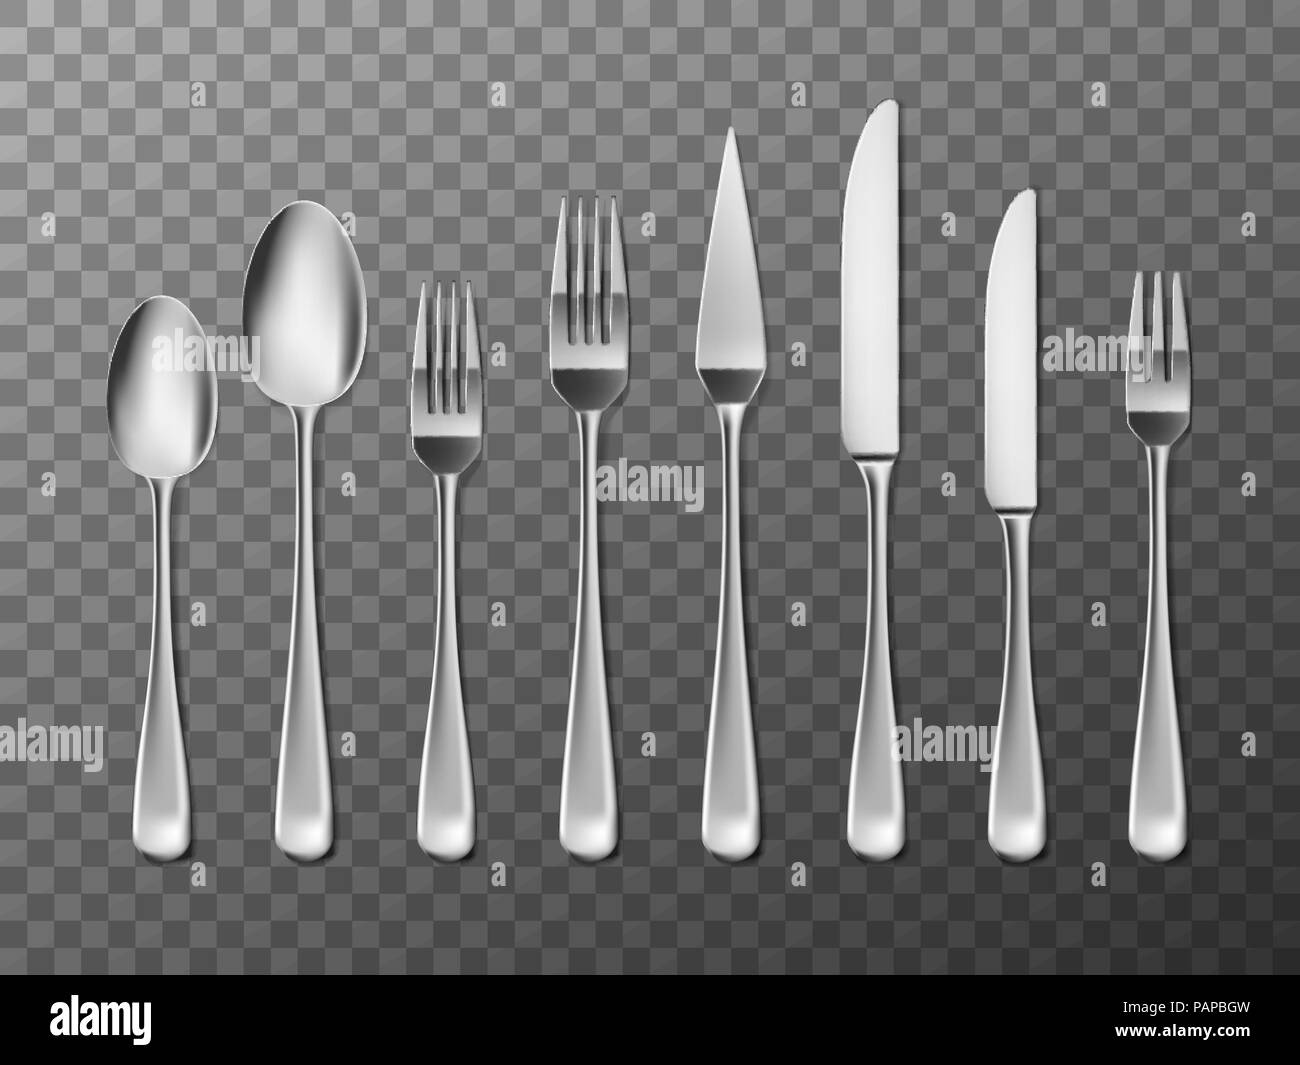 Steel Cutlery, knife, fork and spoon in realistic style. Cutlery set design isolated. Vector illustration Stock Vector